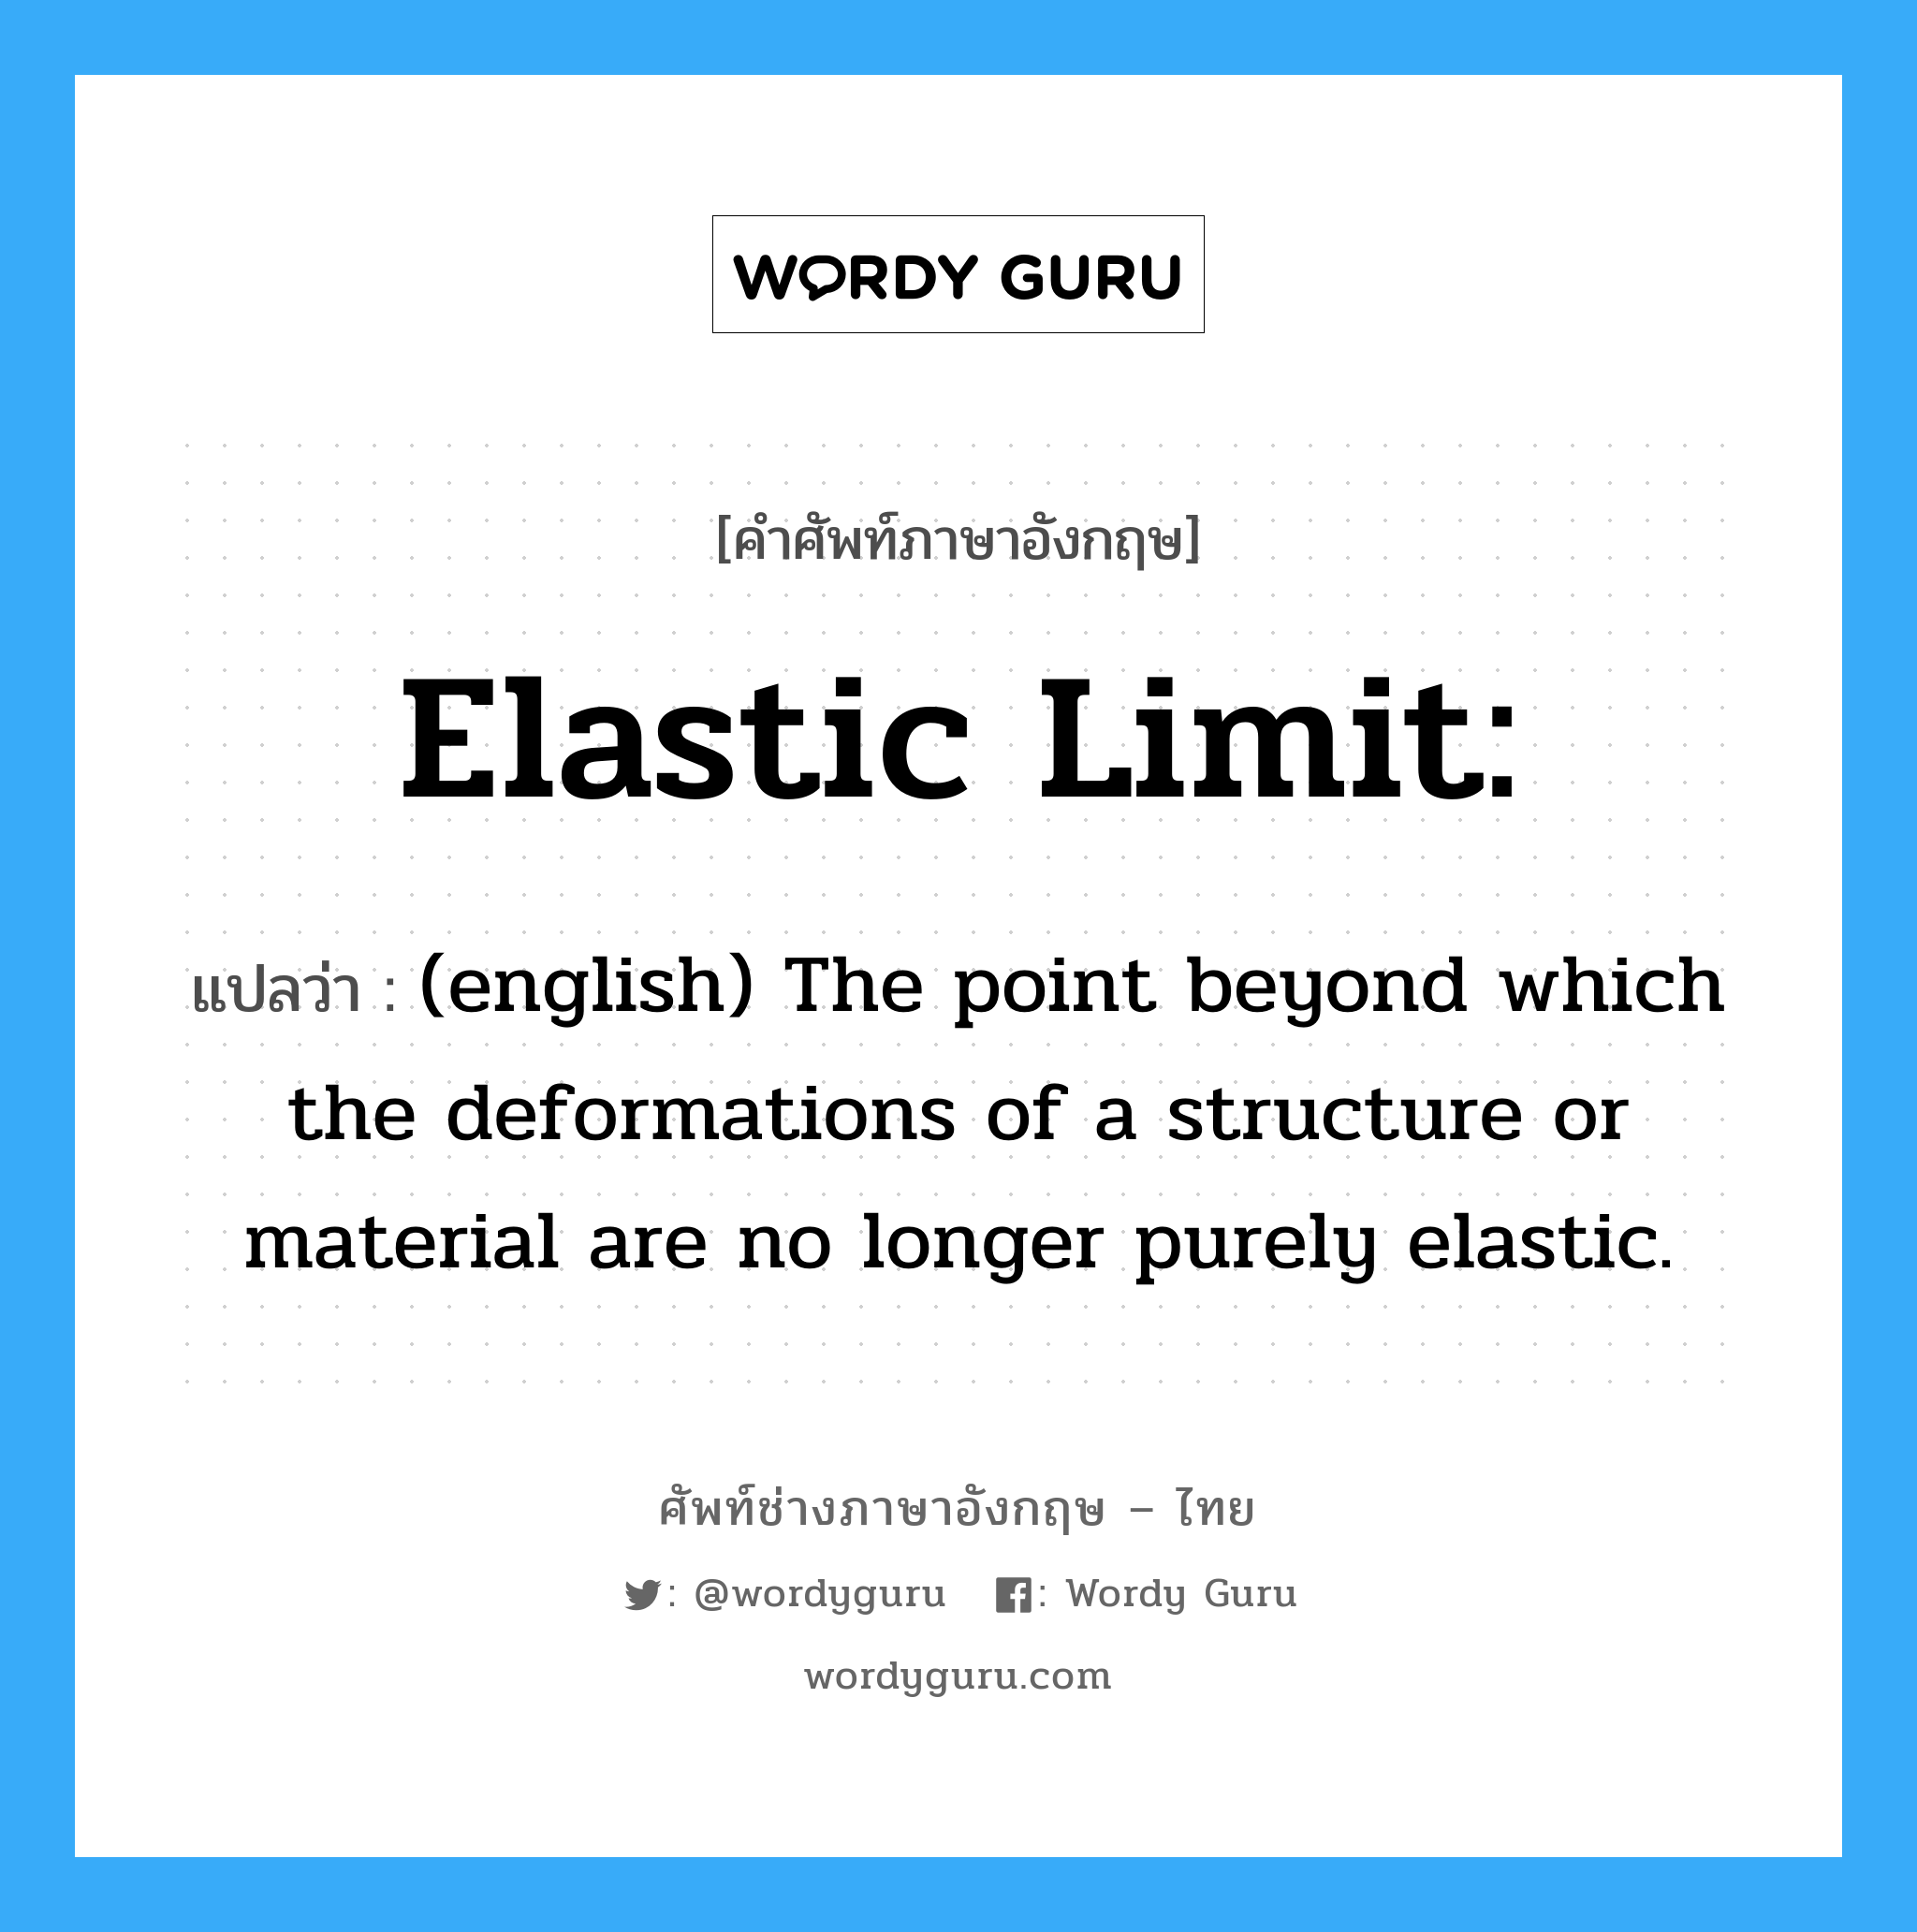 (english) The point beyond which the deformations of a structure or material are no longer purely elastic. ภาษาอังกฤษ?, คำศัพท์ช่างภาษาอังกฤษ - ไทย (english) The point beyond which the deformations of a structure or material are no longer purely elastic. คำศัพท์ภาษาอังกฤษ (english) The point beyond which the deformations of a structure or material are no longer purely elastic. แปลว่า Elastic limit: